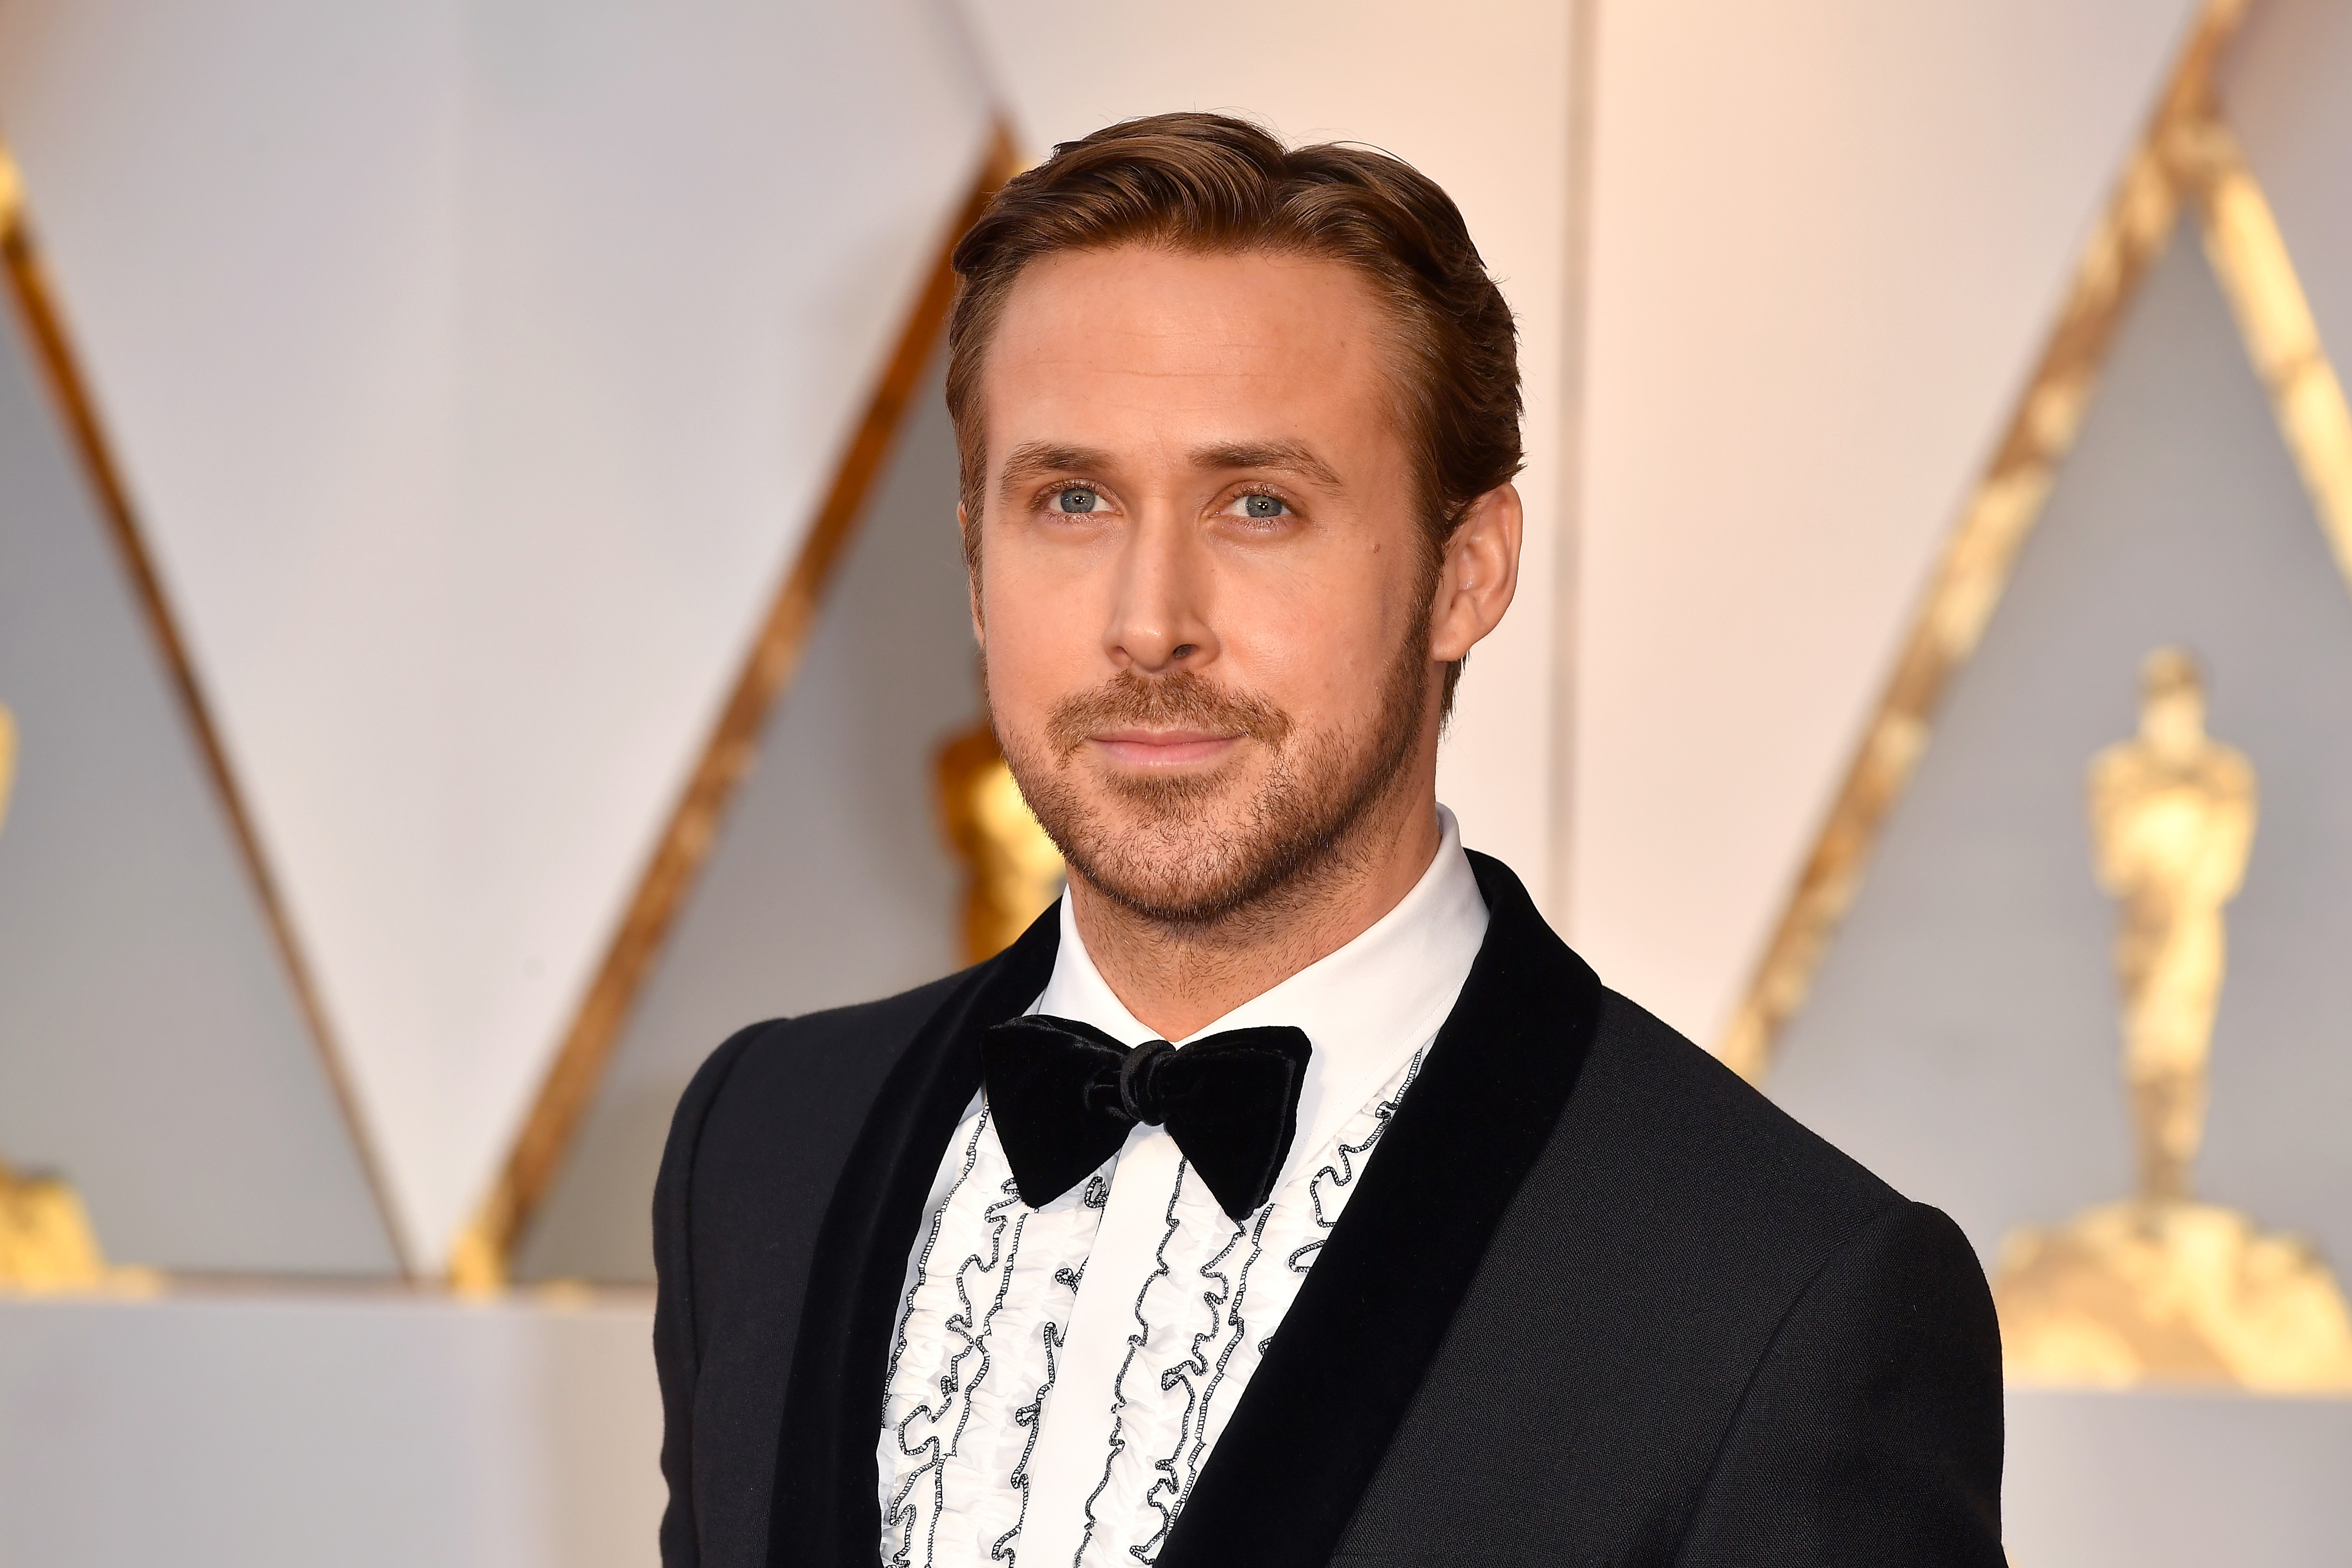 Ryan Gosling during the 89th Annual Academy Awards at Hollywood & Highland Center on February 26, 2017, in Hollywood, California. | Source: Getty Images